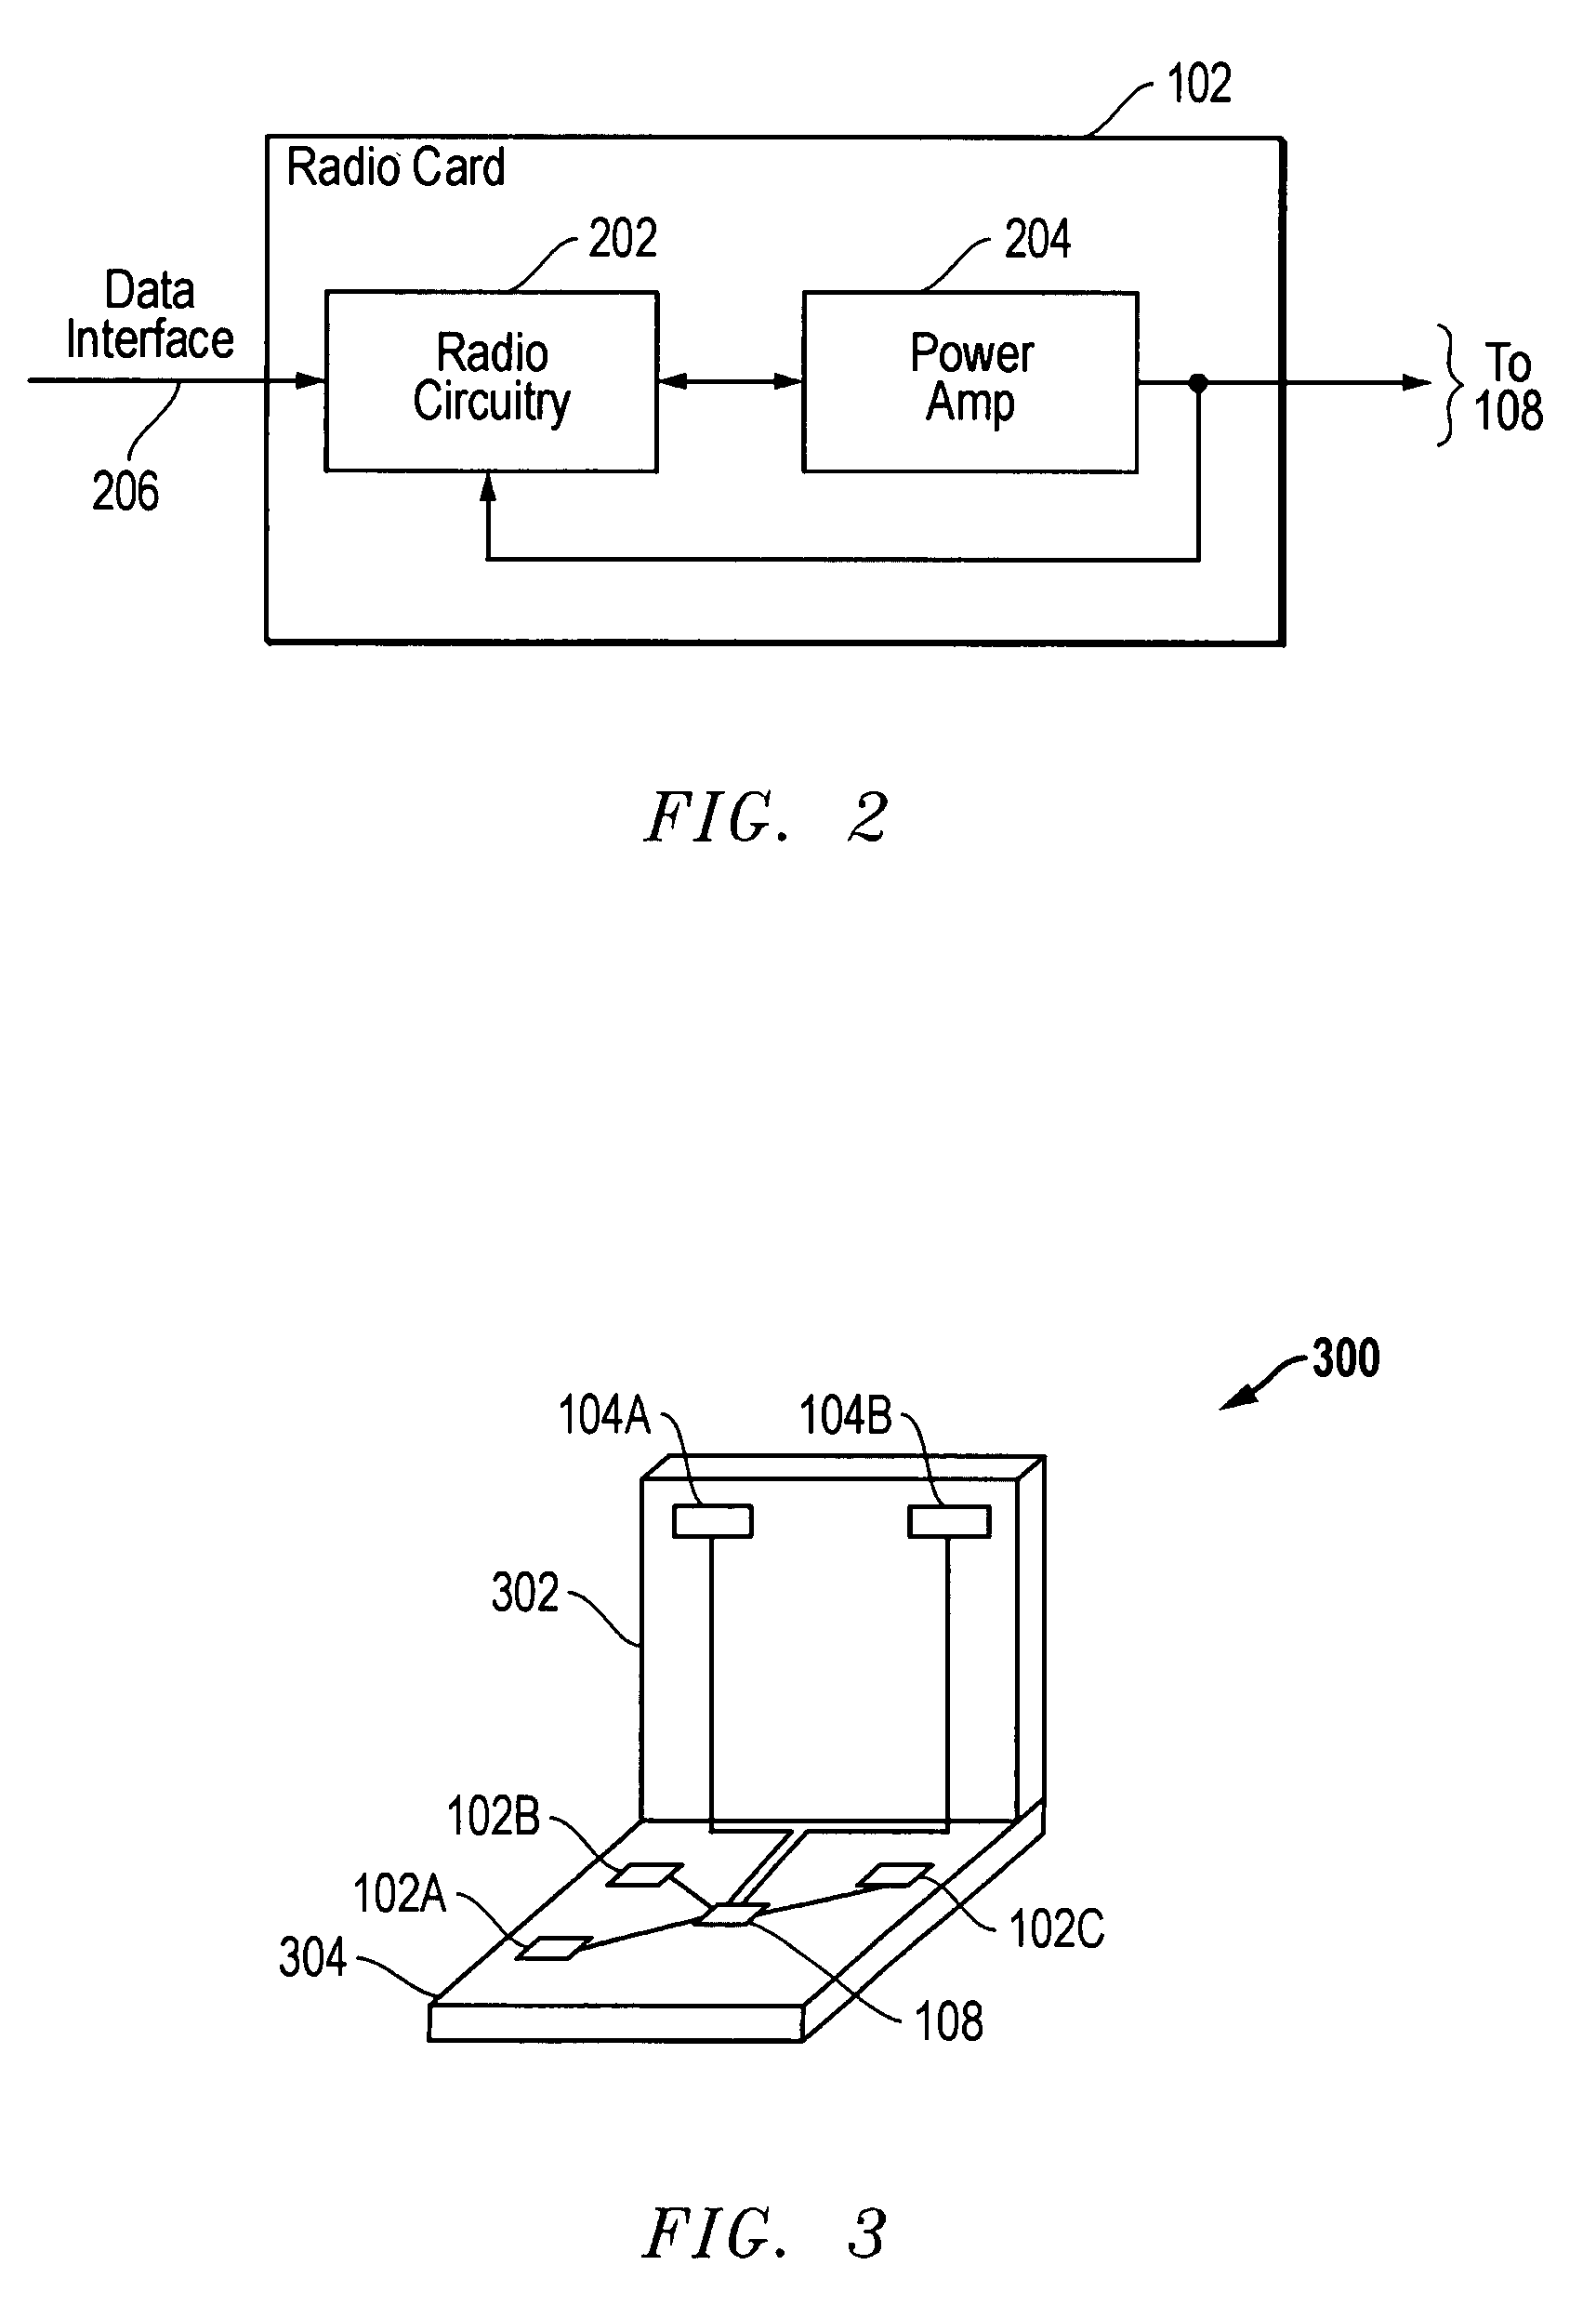 Database for antenna system matching for wireless communications in portable information handling systems